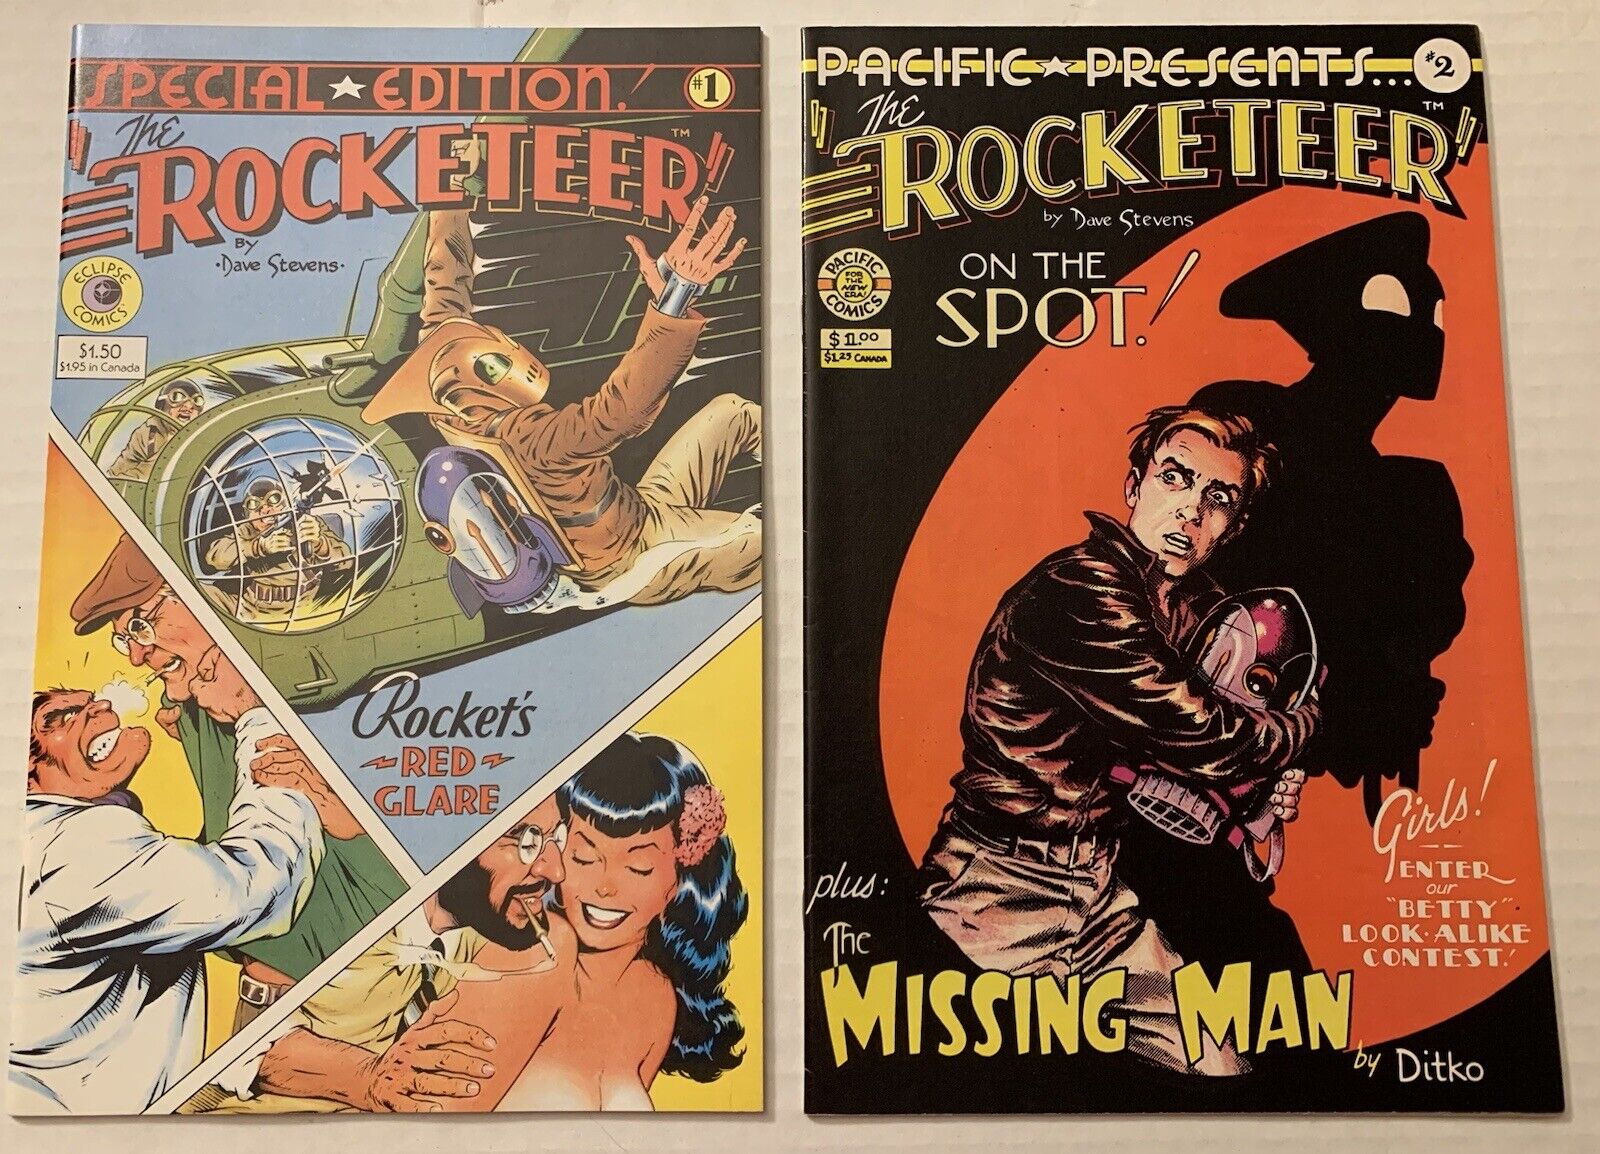 Special Edition The Rocketeer #1 (1984) and The Rocketeer On The Spot (1983)